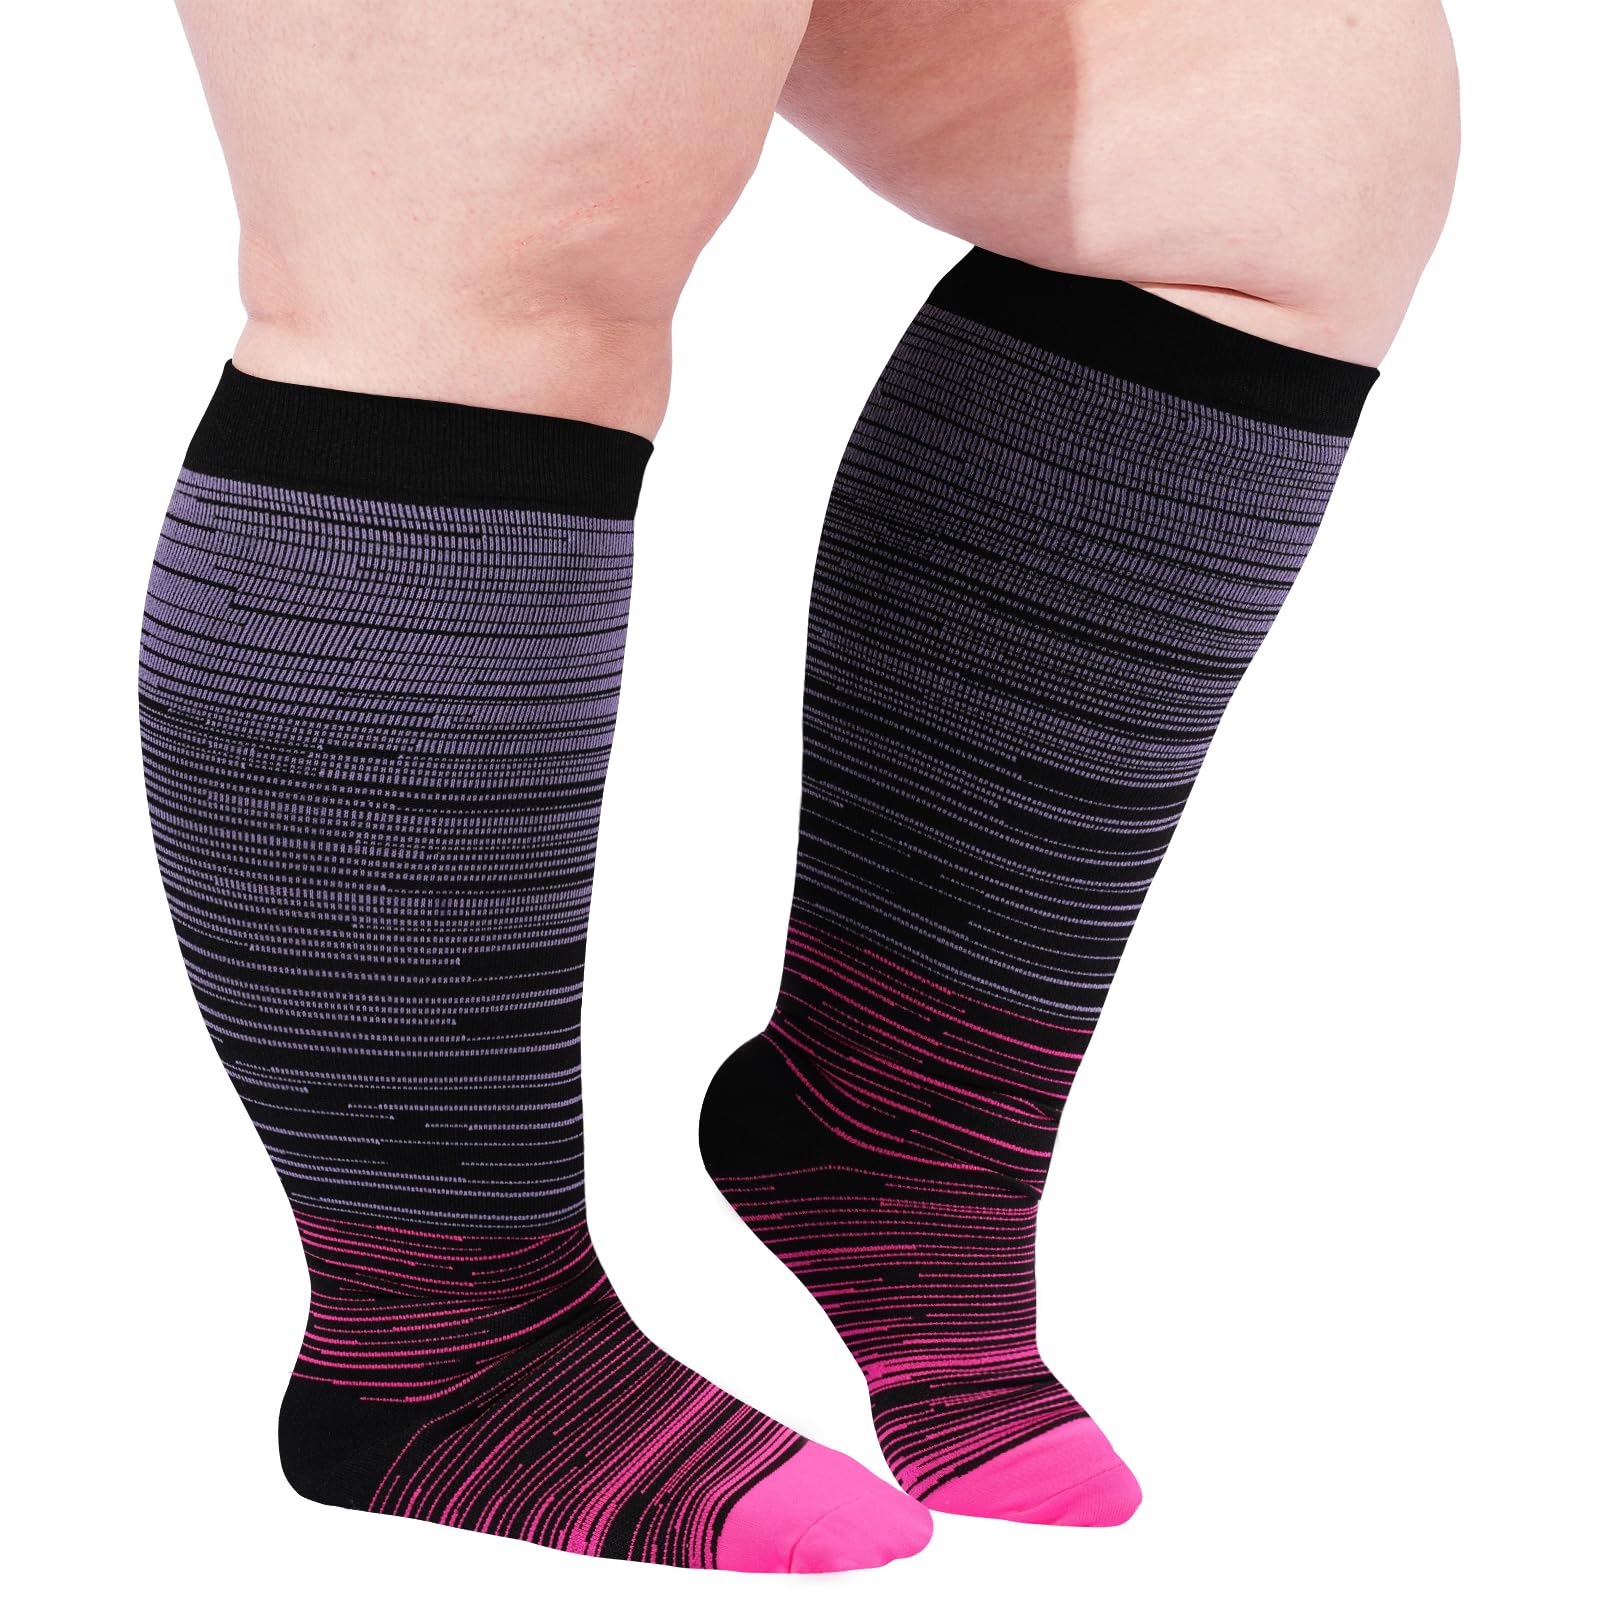 Plus Size Compression Socks for Wide Calf-Tie Dye